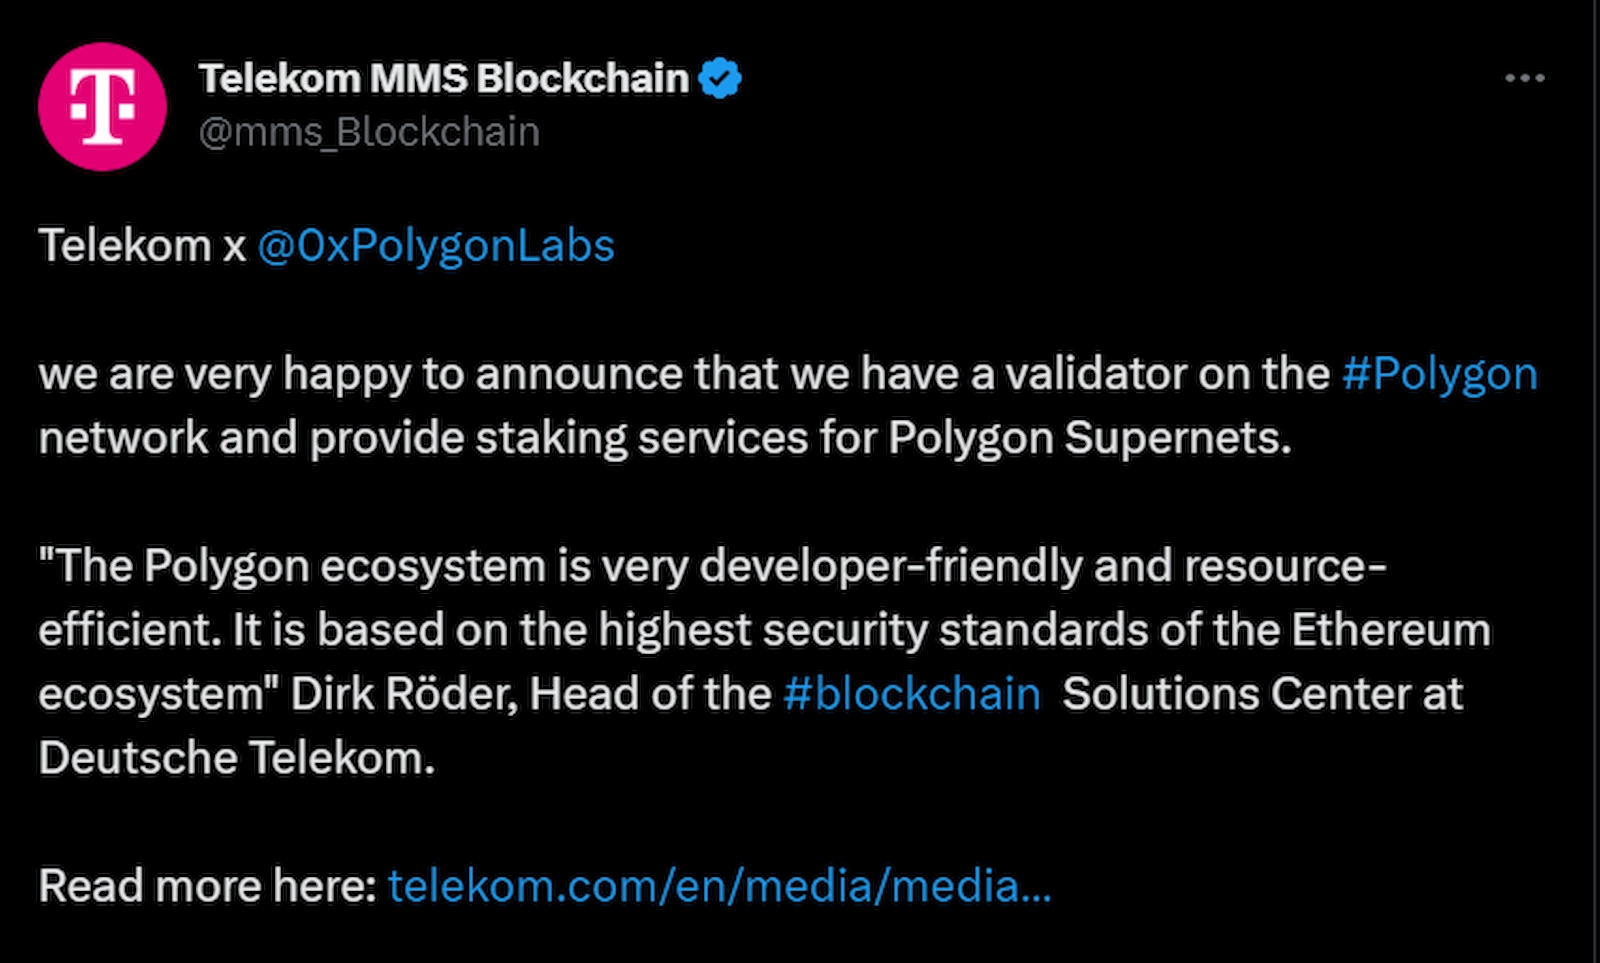 Deutsche Telekom was excited to become a validator for the Polygon network.